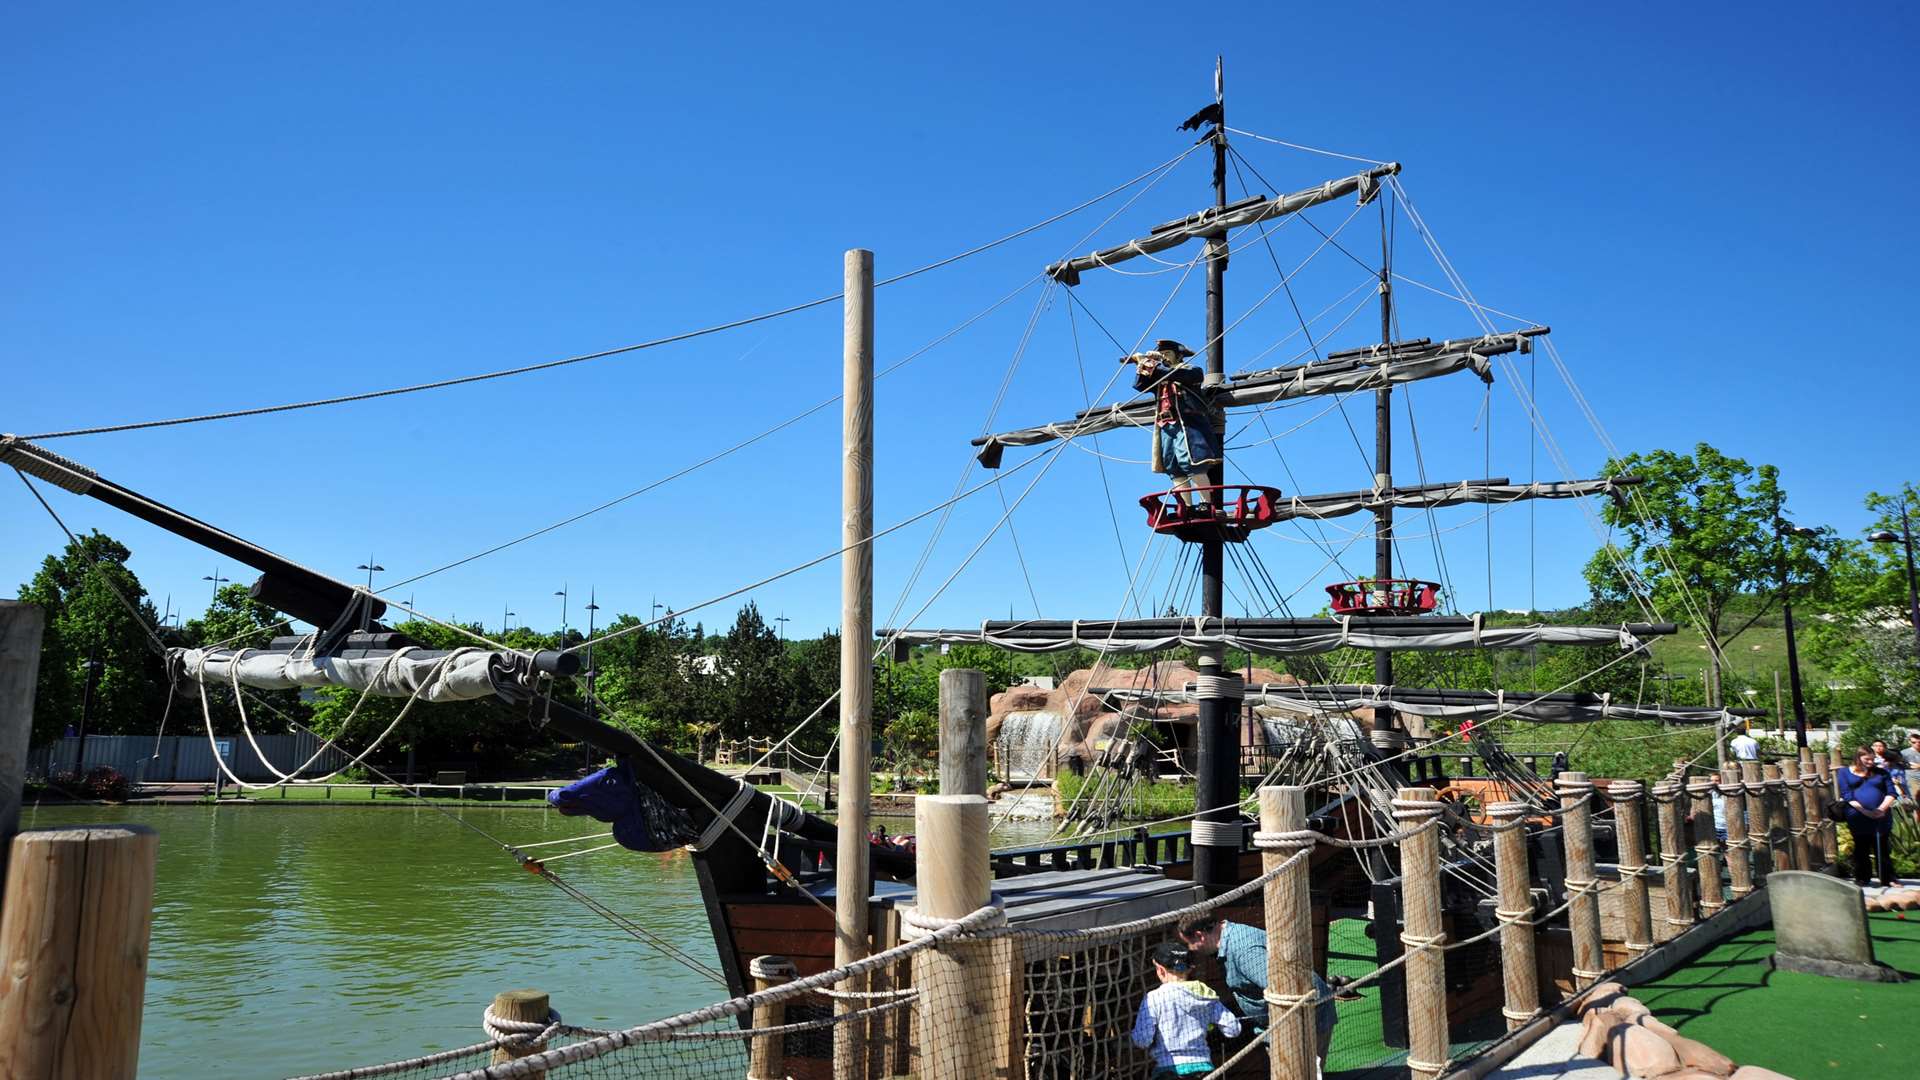 Have a go at some pirate crazy golf